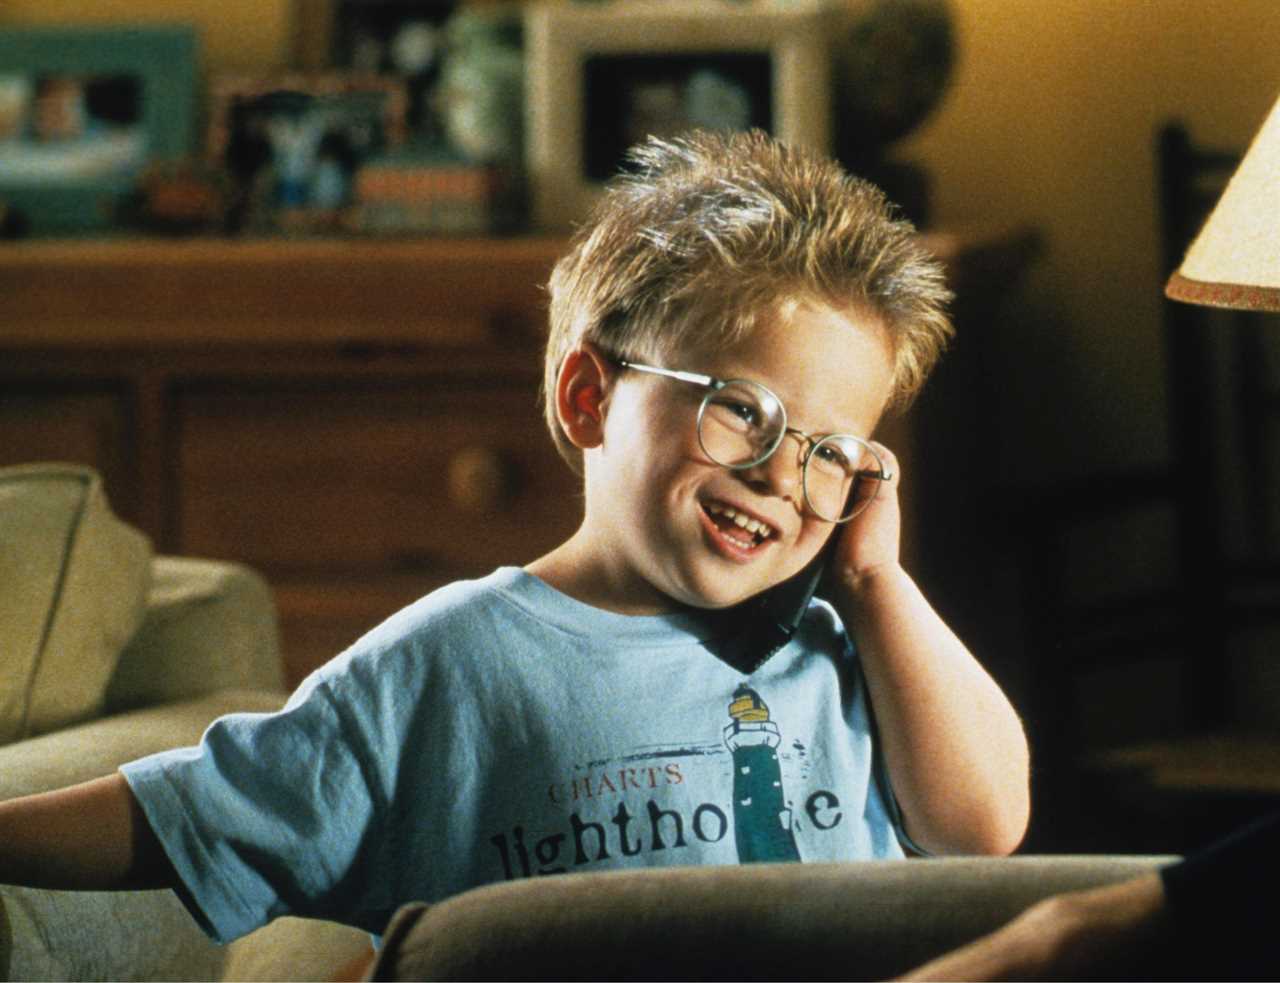 Jerry Maguire’s rarely seen child star Jonathan Lipnicki is unrecognisable 26 years after starring alongside Tom Cruise